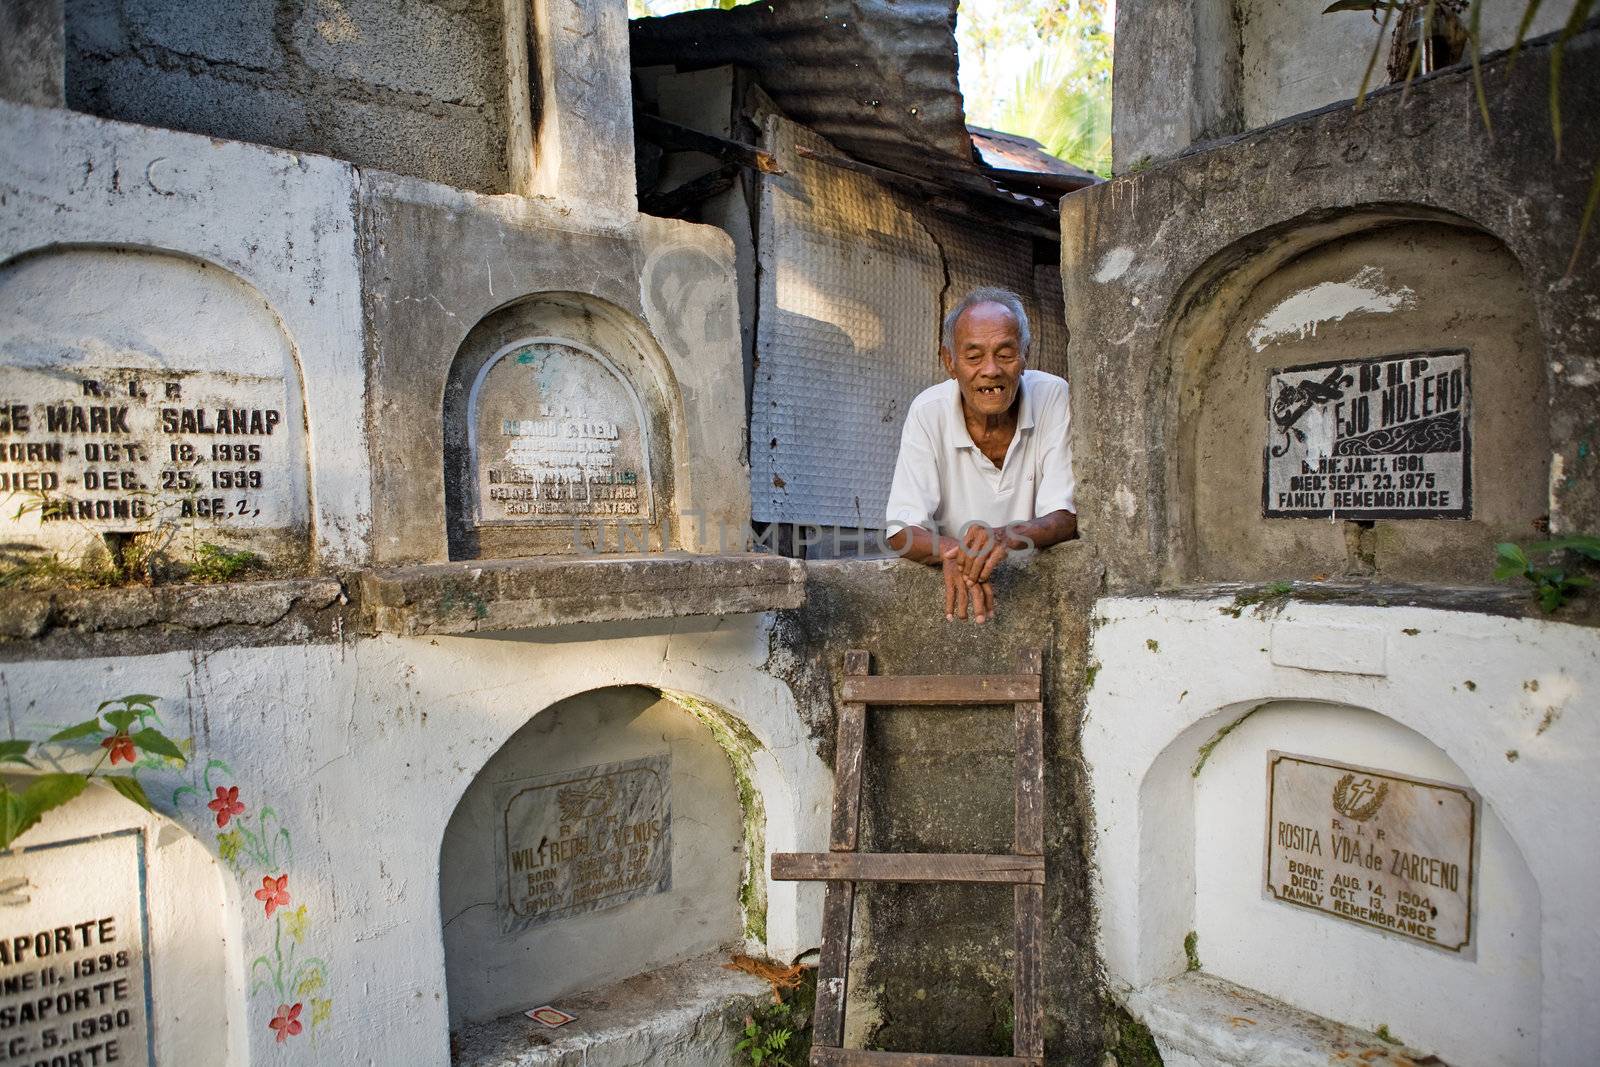 Bacolod City, Philippine Islands, March 2, 2012 - Homeless elderly Filipino man living among stacked concrete tombs in a cemetery.